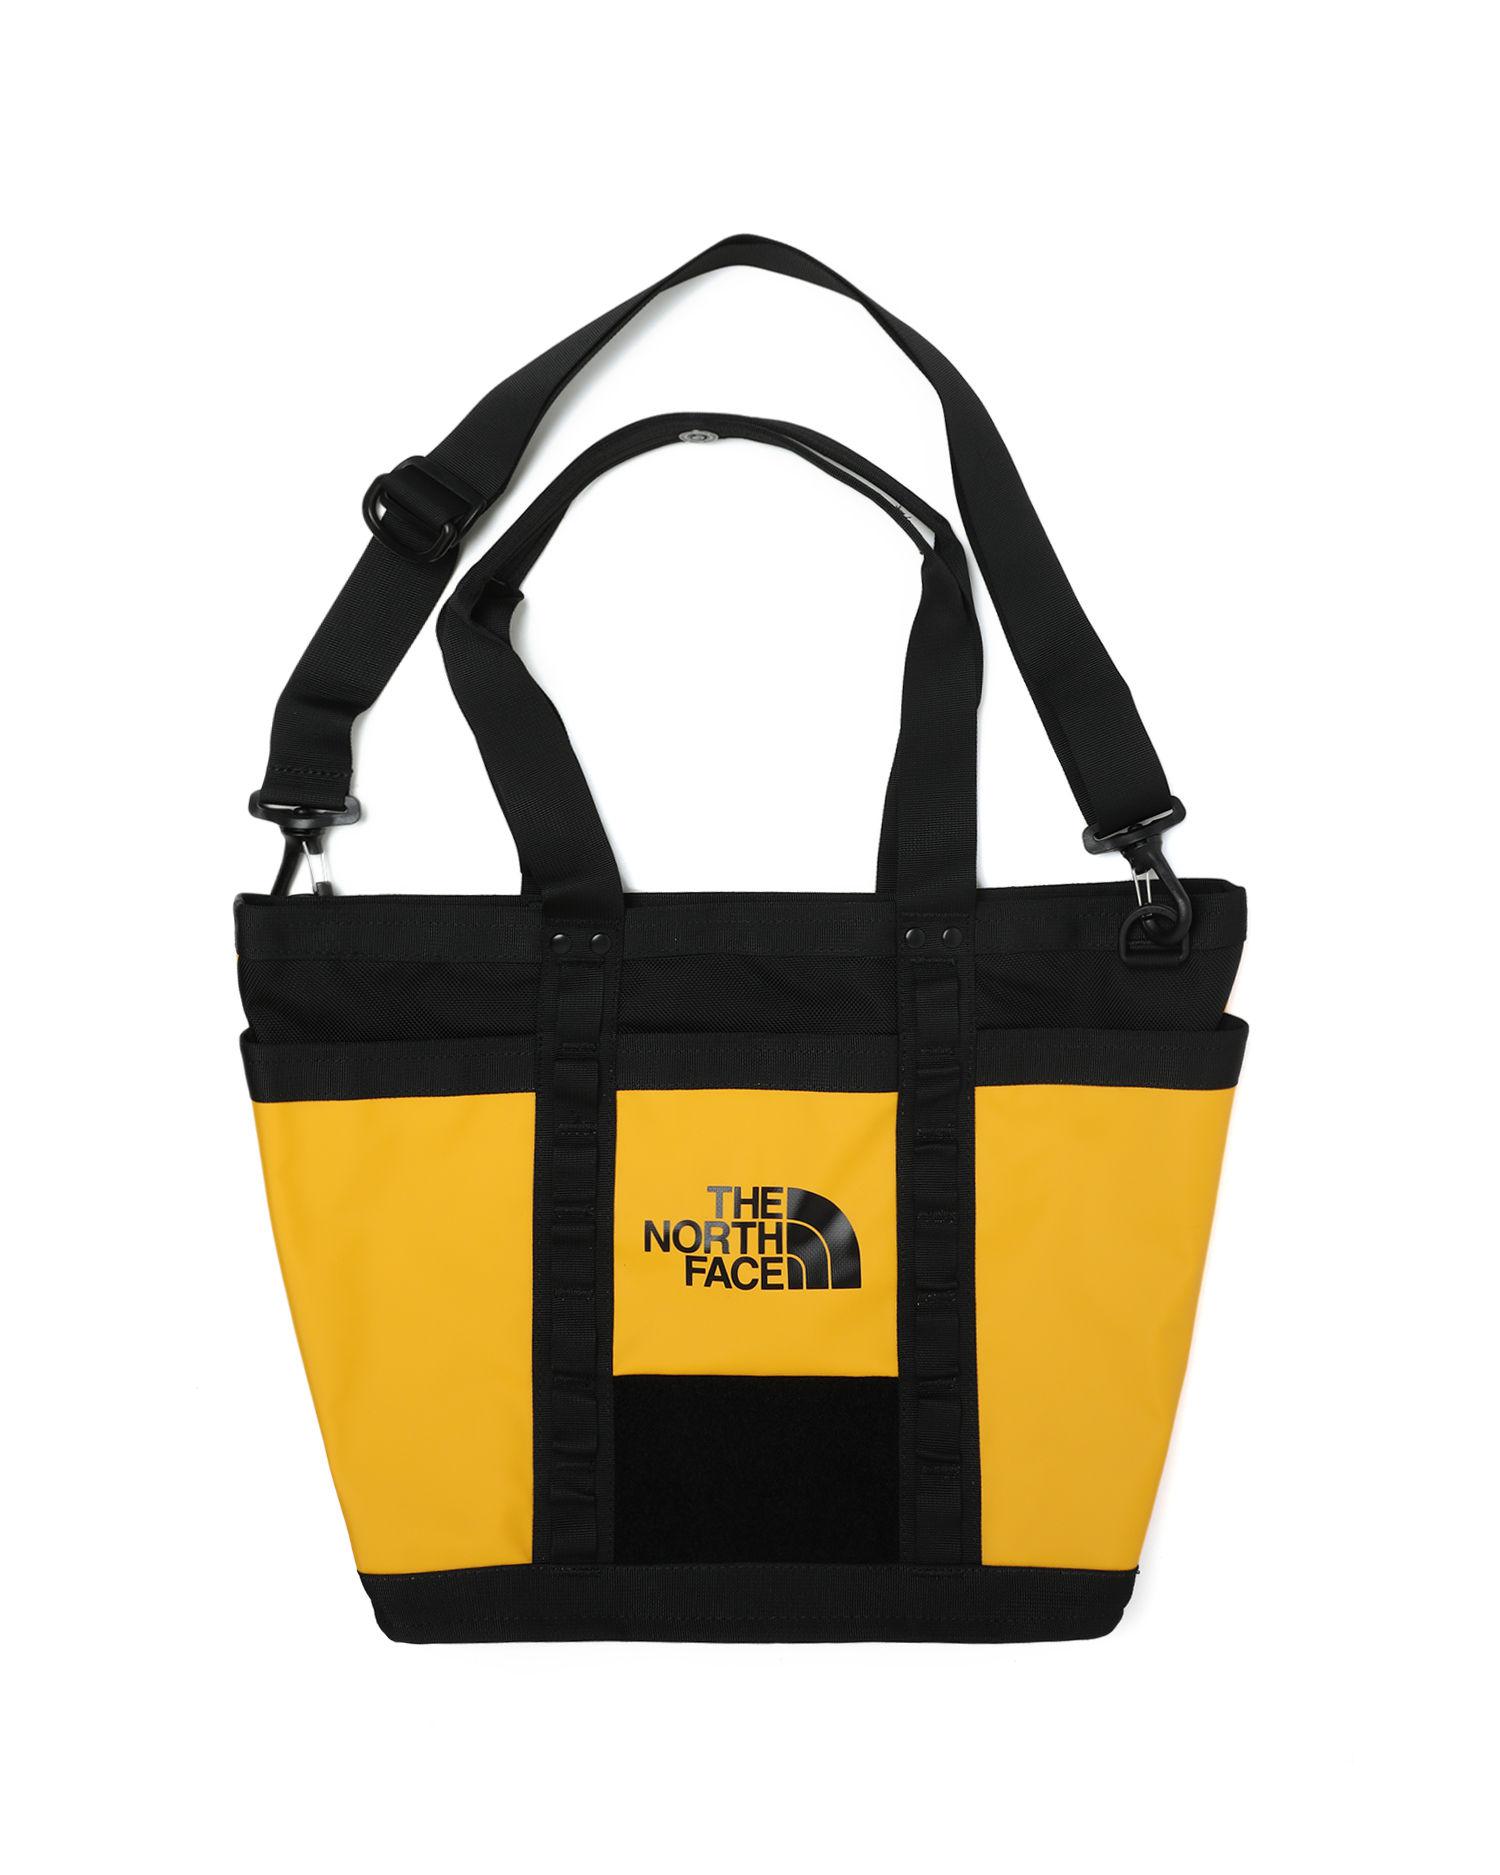 Explore utility tote bag by THE NORTH FACE